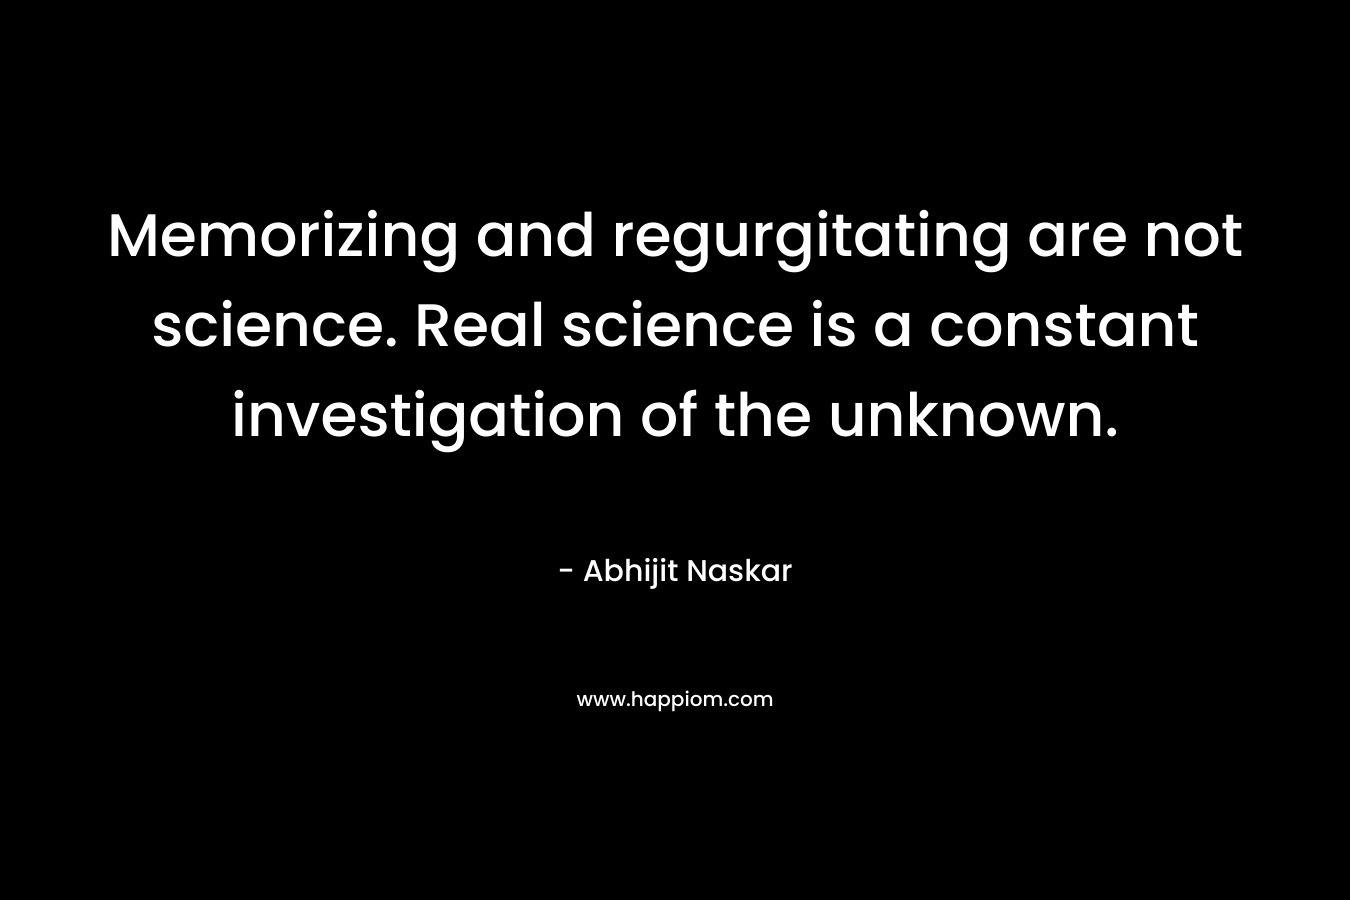 Memorizing and regurgitating are not science. Real science is a constant investigation of the unknown.